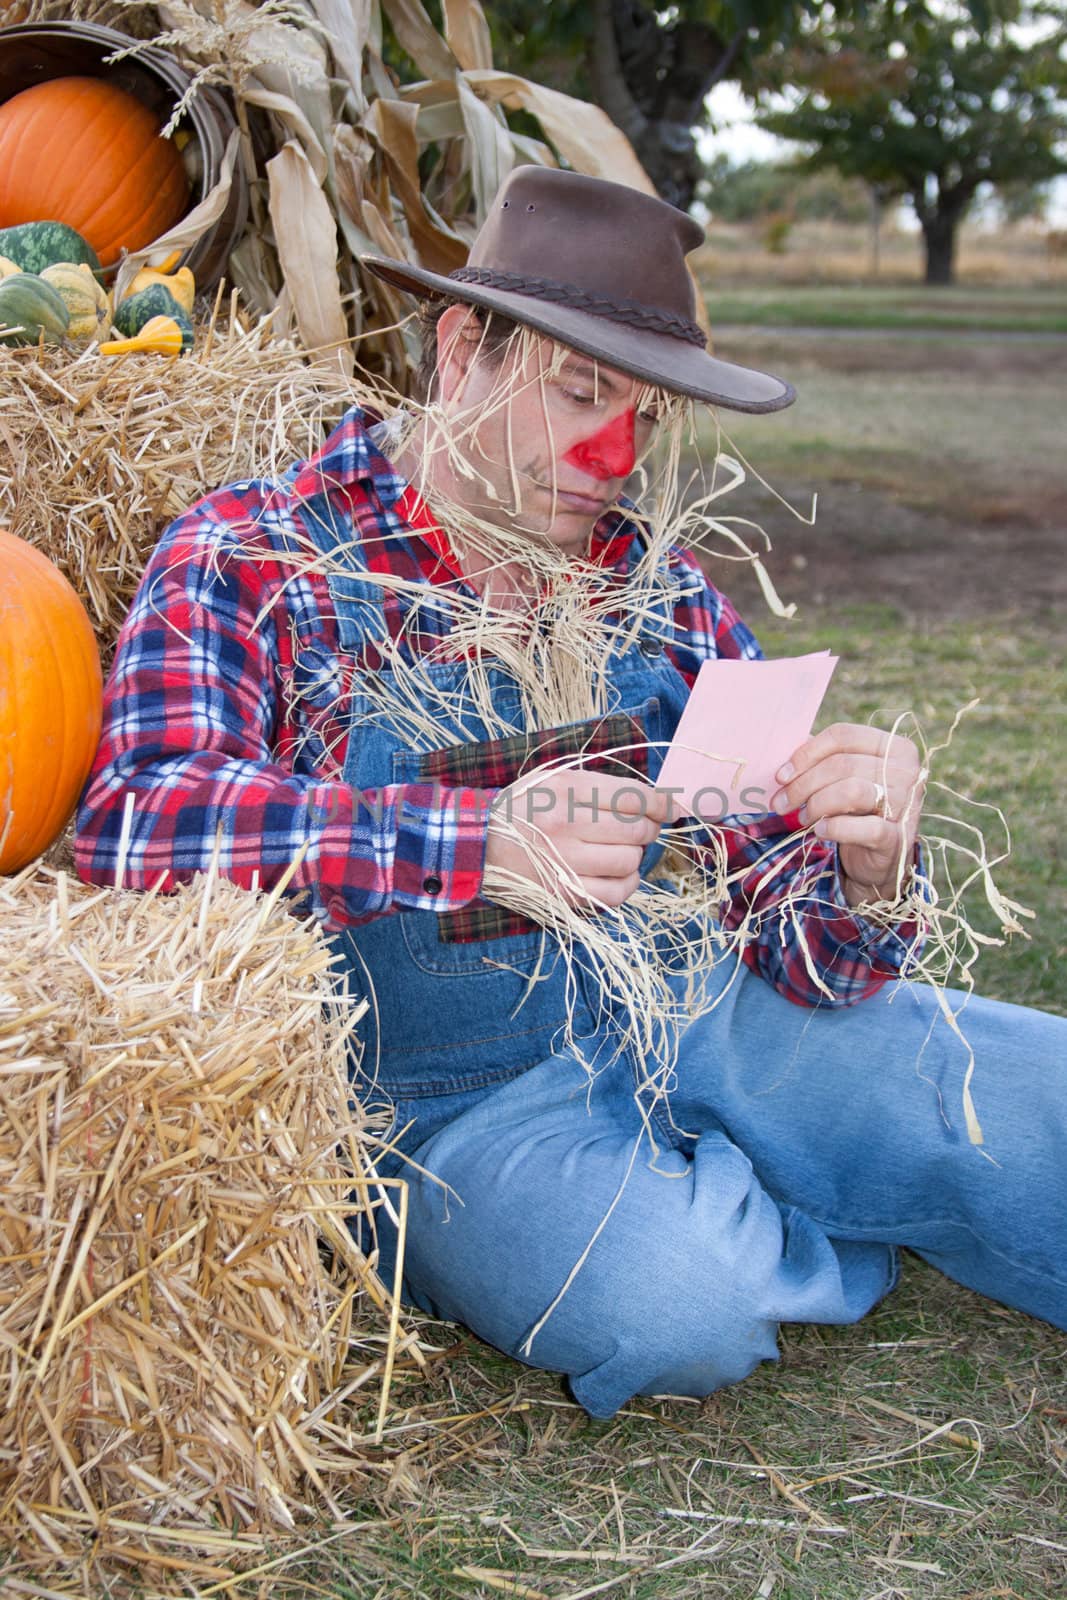 A scarecrow gets a pink slip at the end of season.